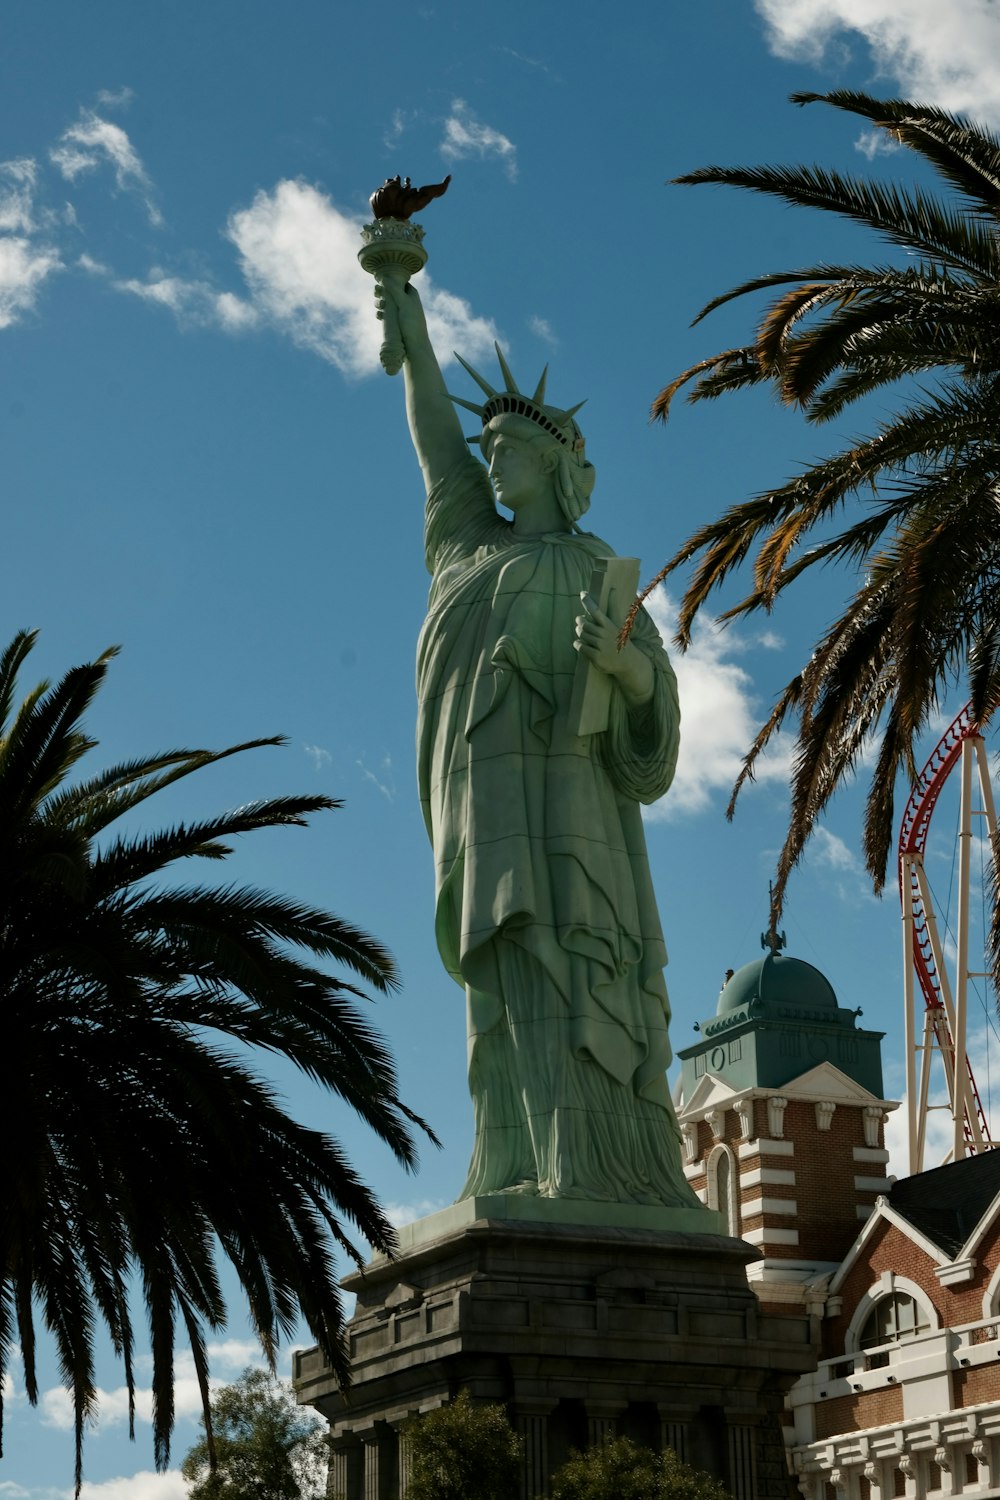 the statue of liberty is surrounded by palm trees